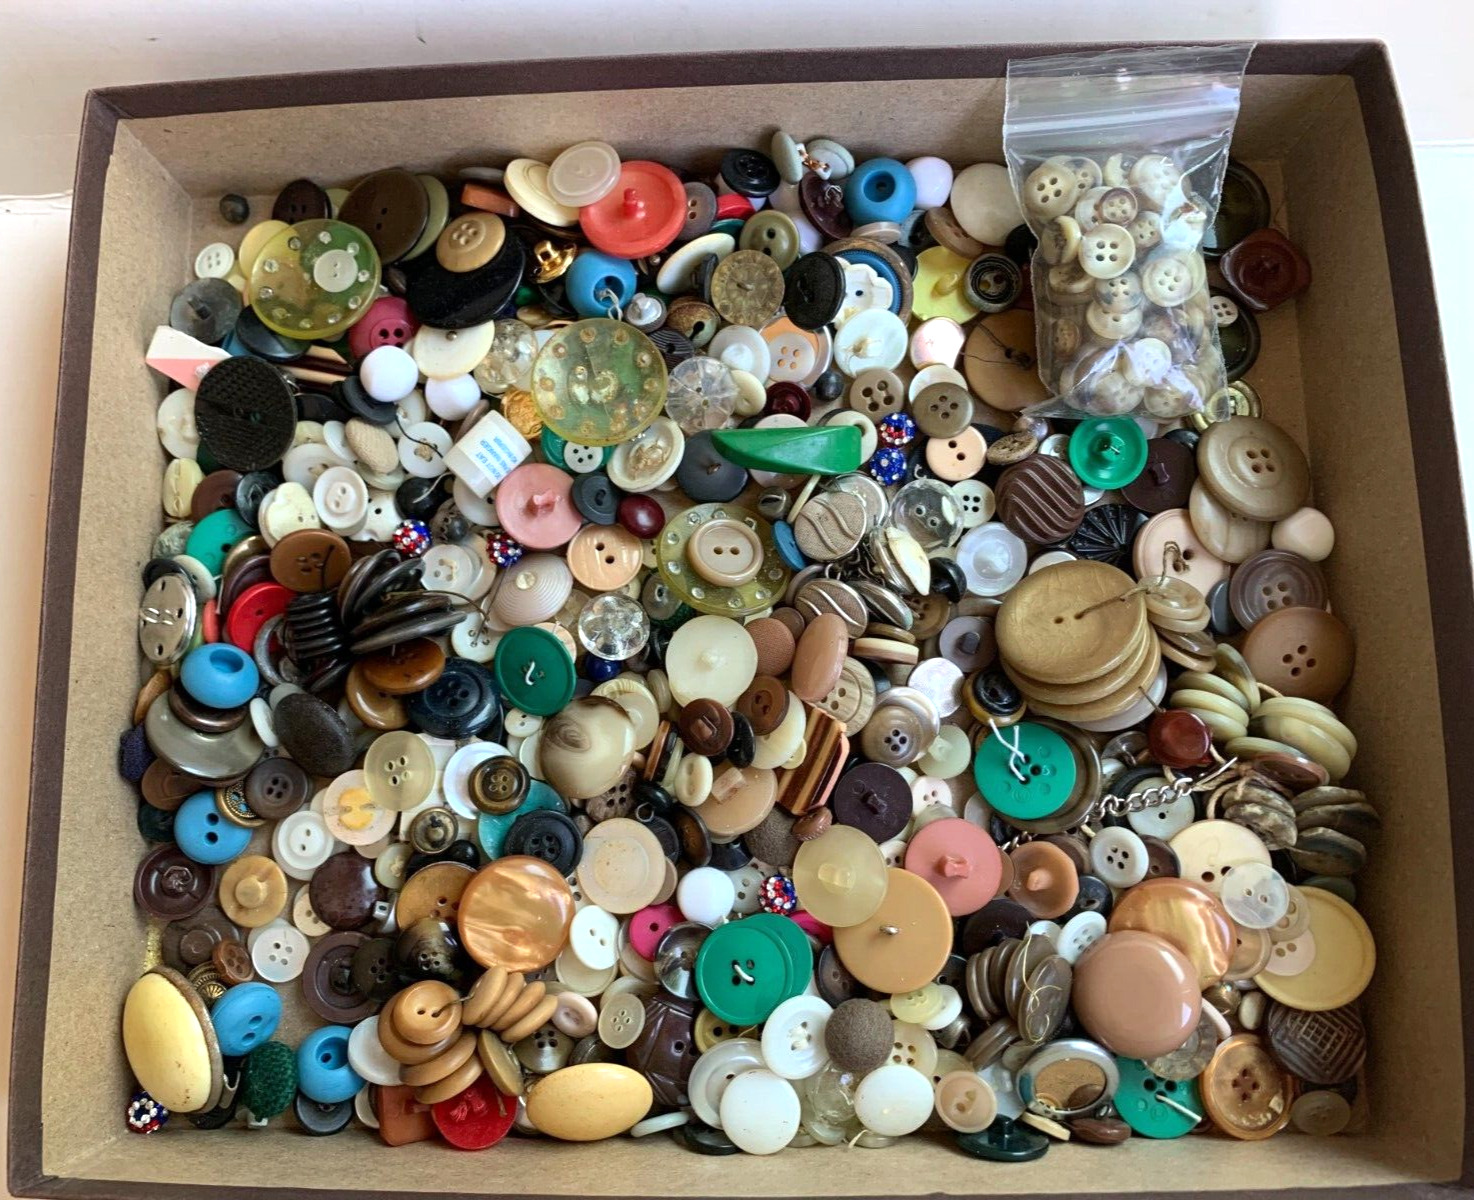 Mixed Lot of Hundreds of Old Buttons for Sewing or Crafts, 1.5#